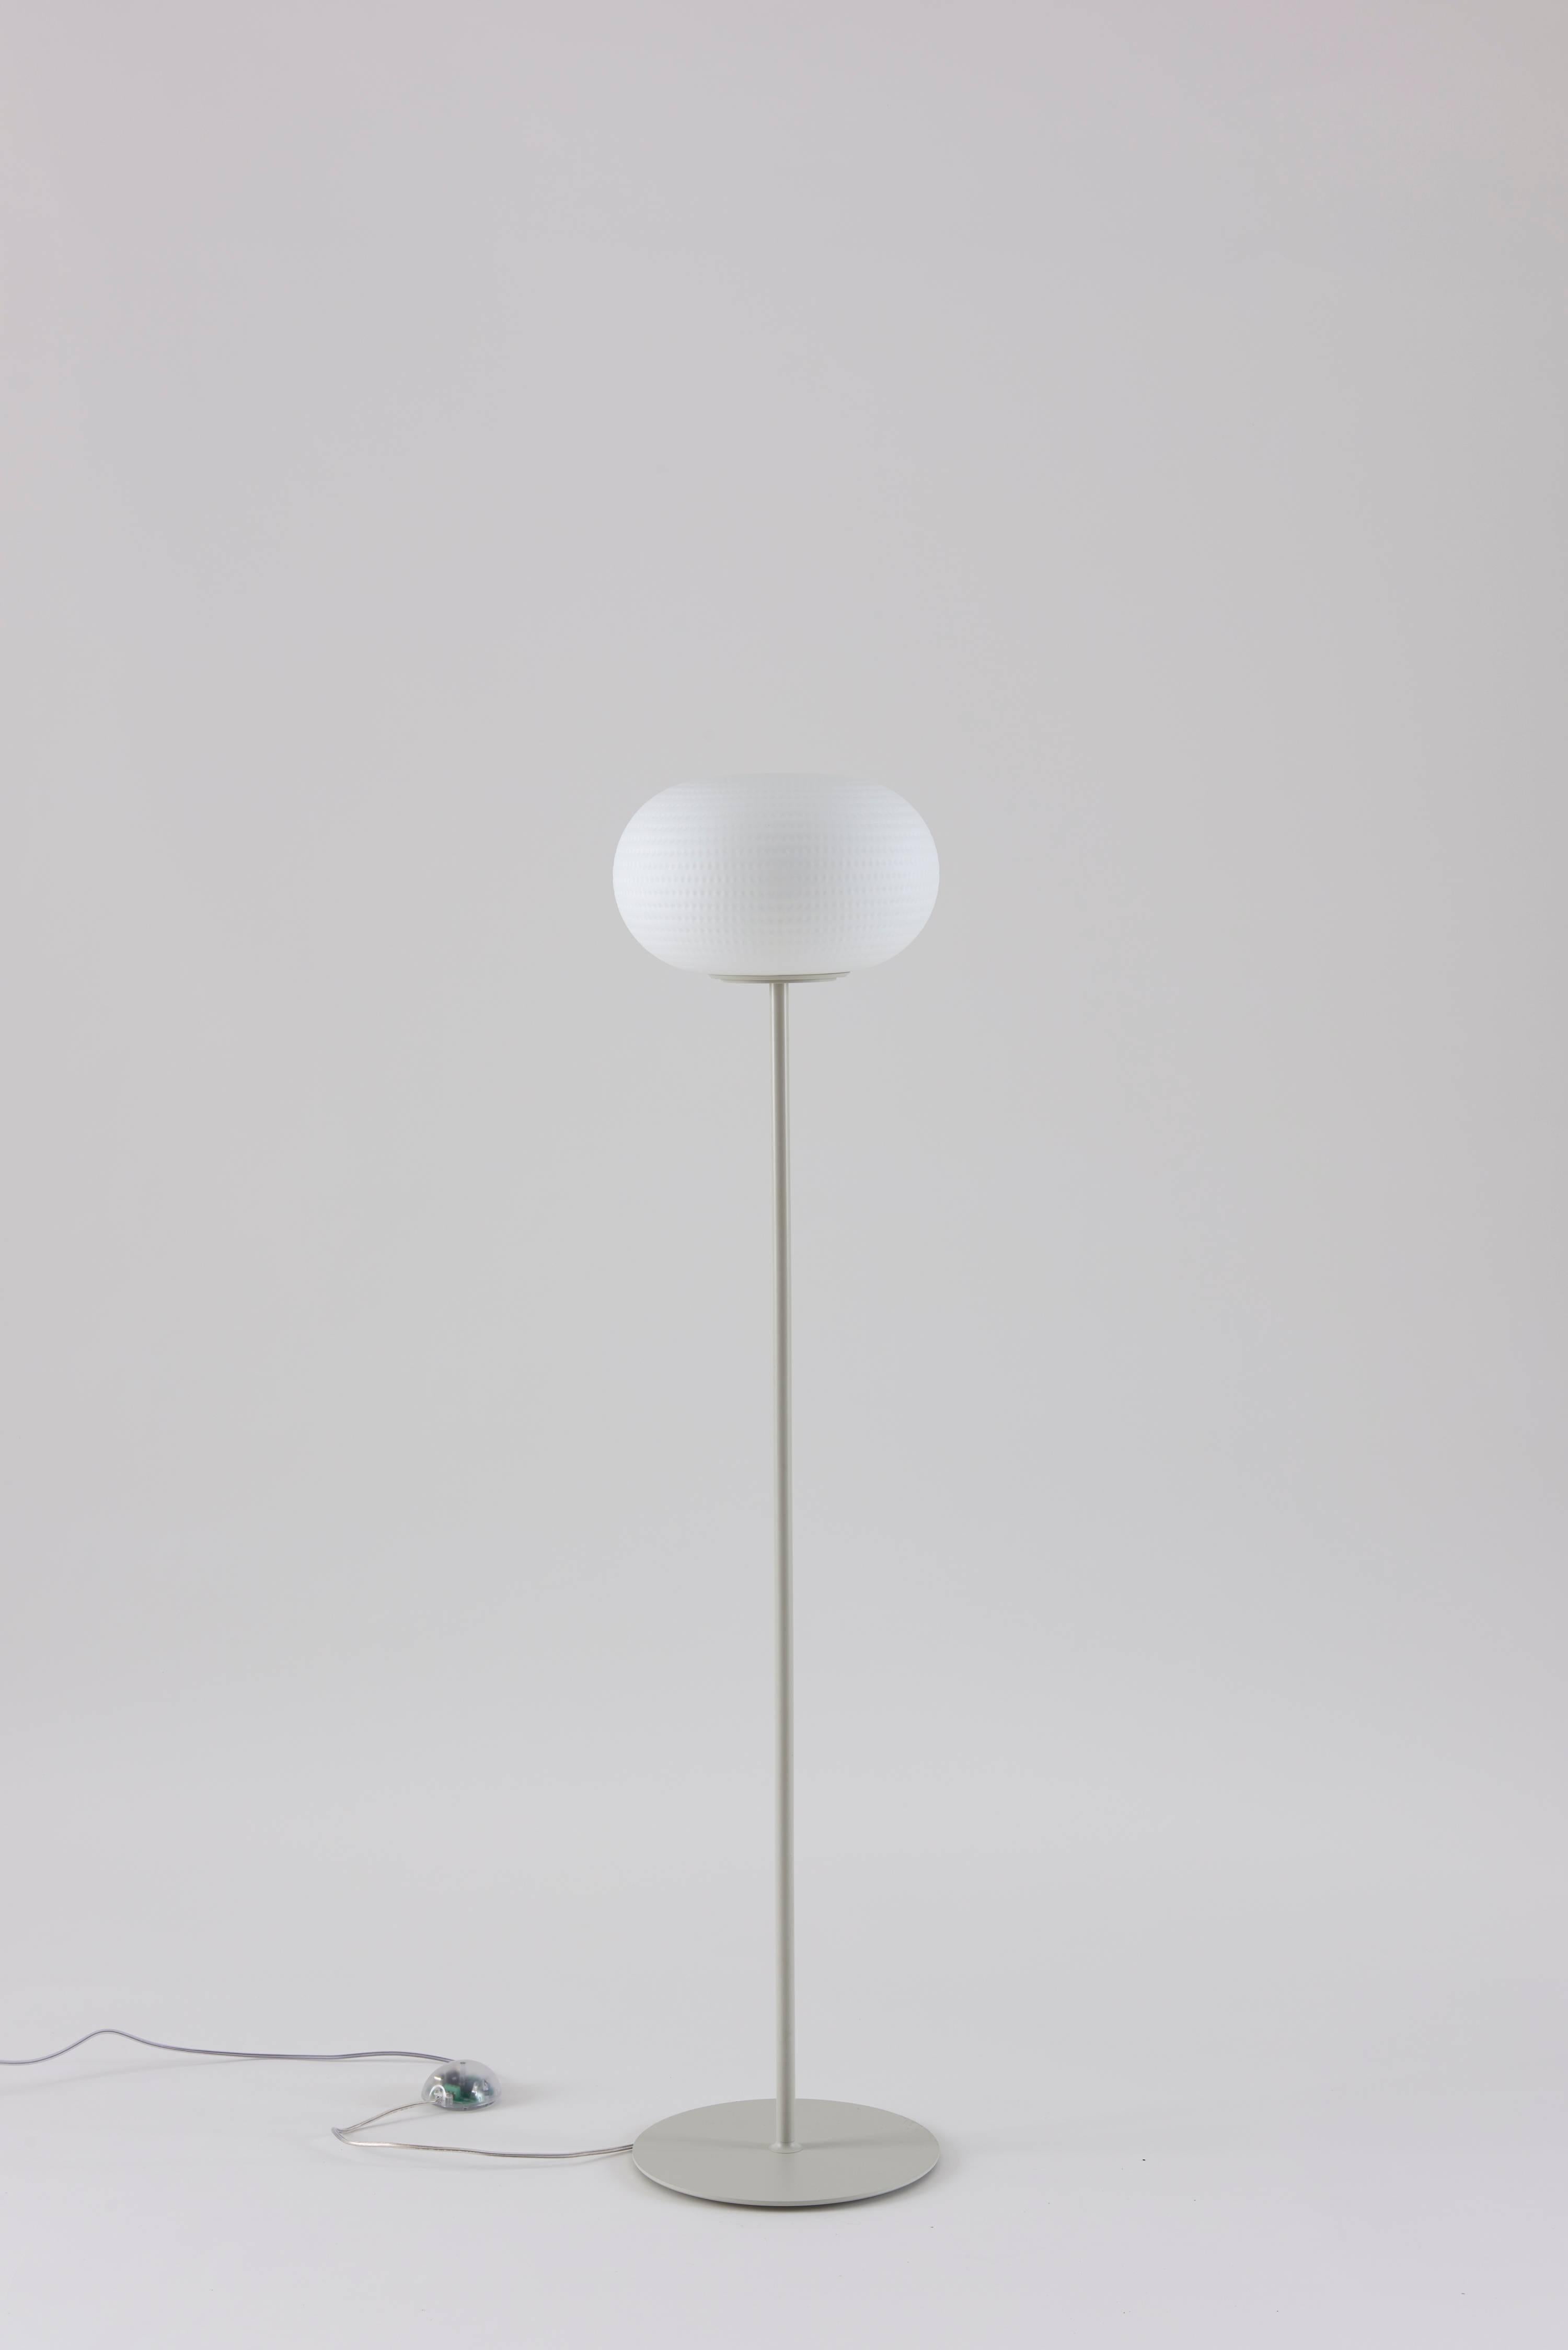 Designed by Matti Klenell in 2015 and manufactured by Fontana Arte, the Bianca floor lamp is a family of lamps with diffuser in blown glass, comprising pendant, floor, wall/ceiling and table versions, the latter with or without base. Its beautifully